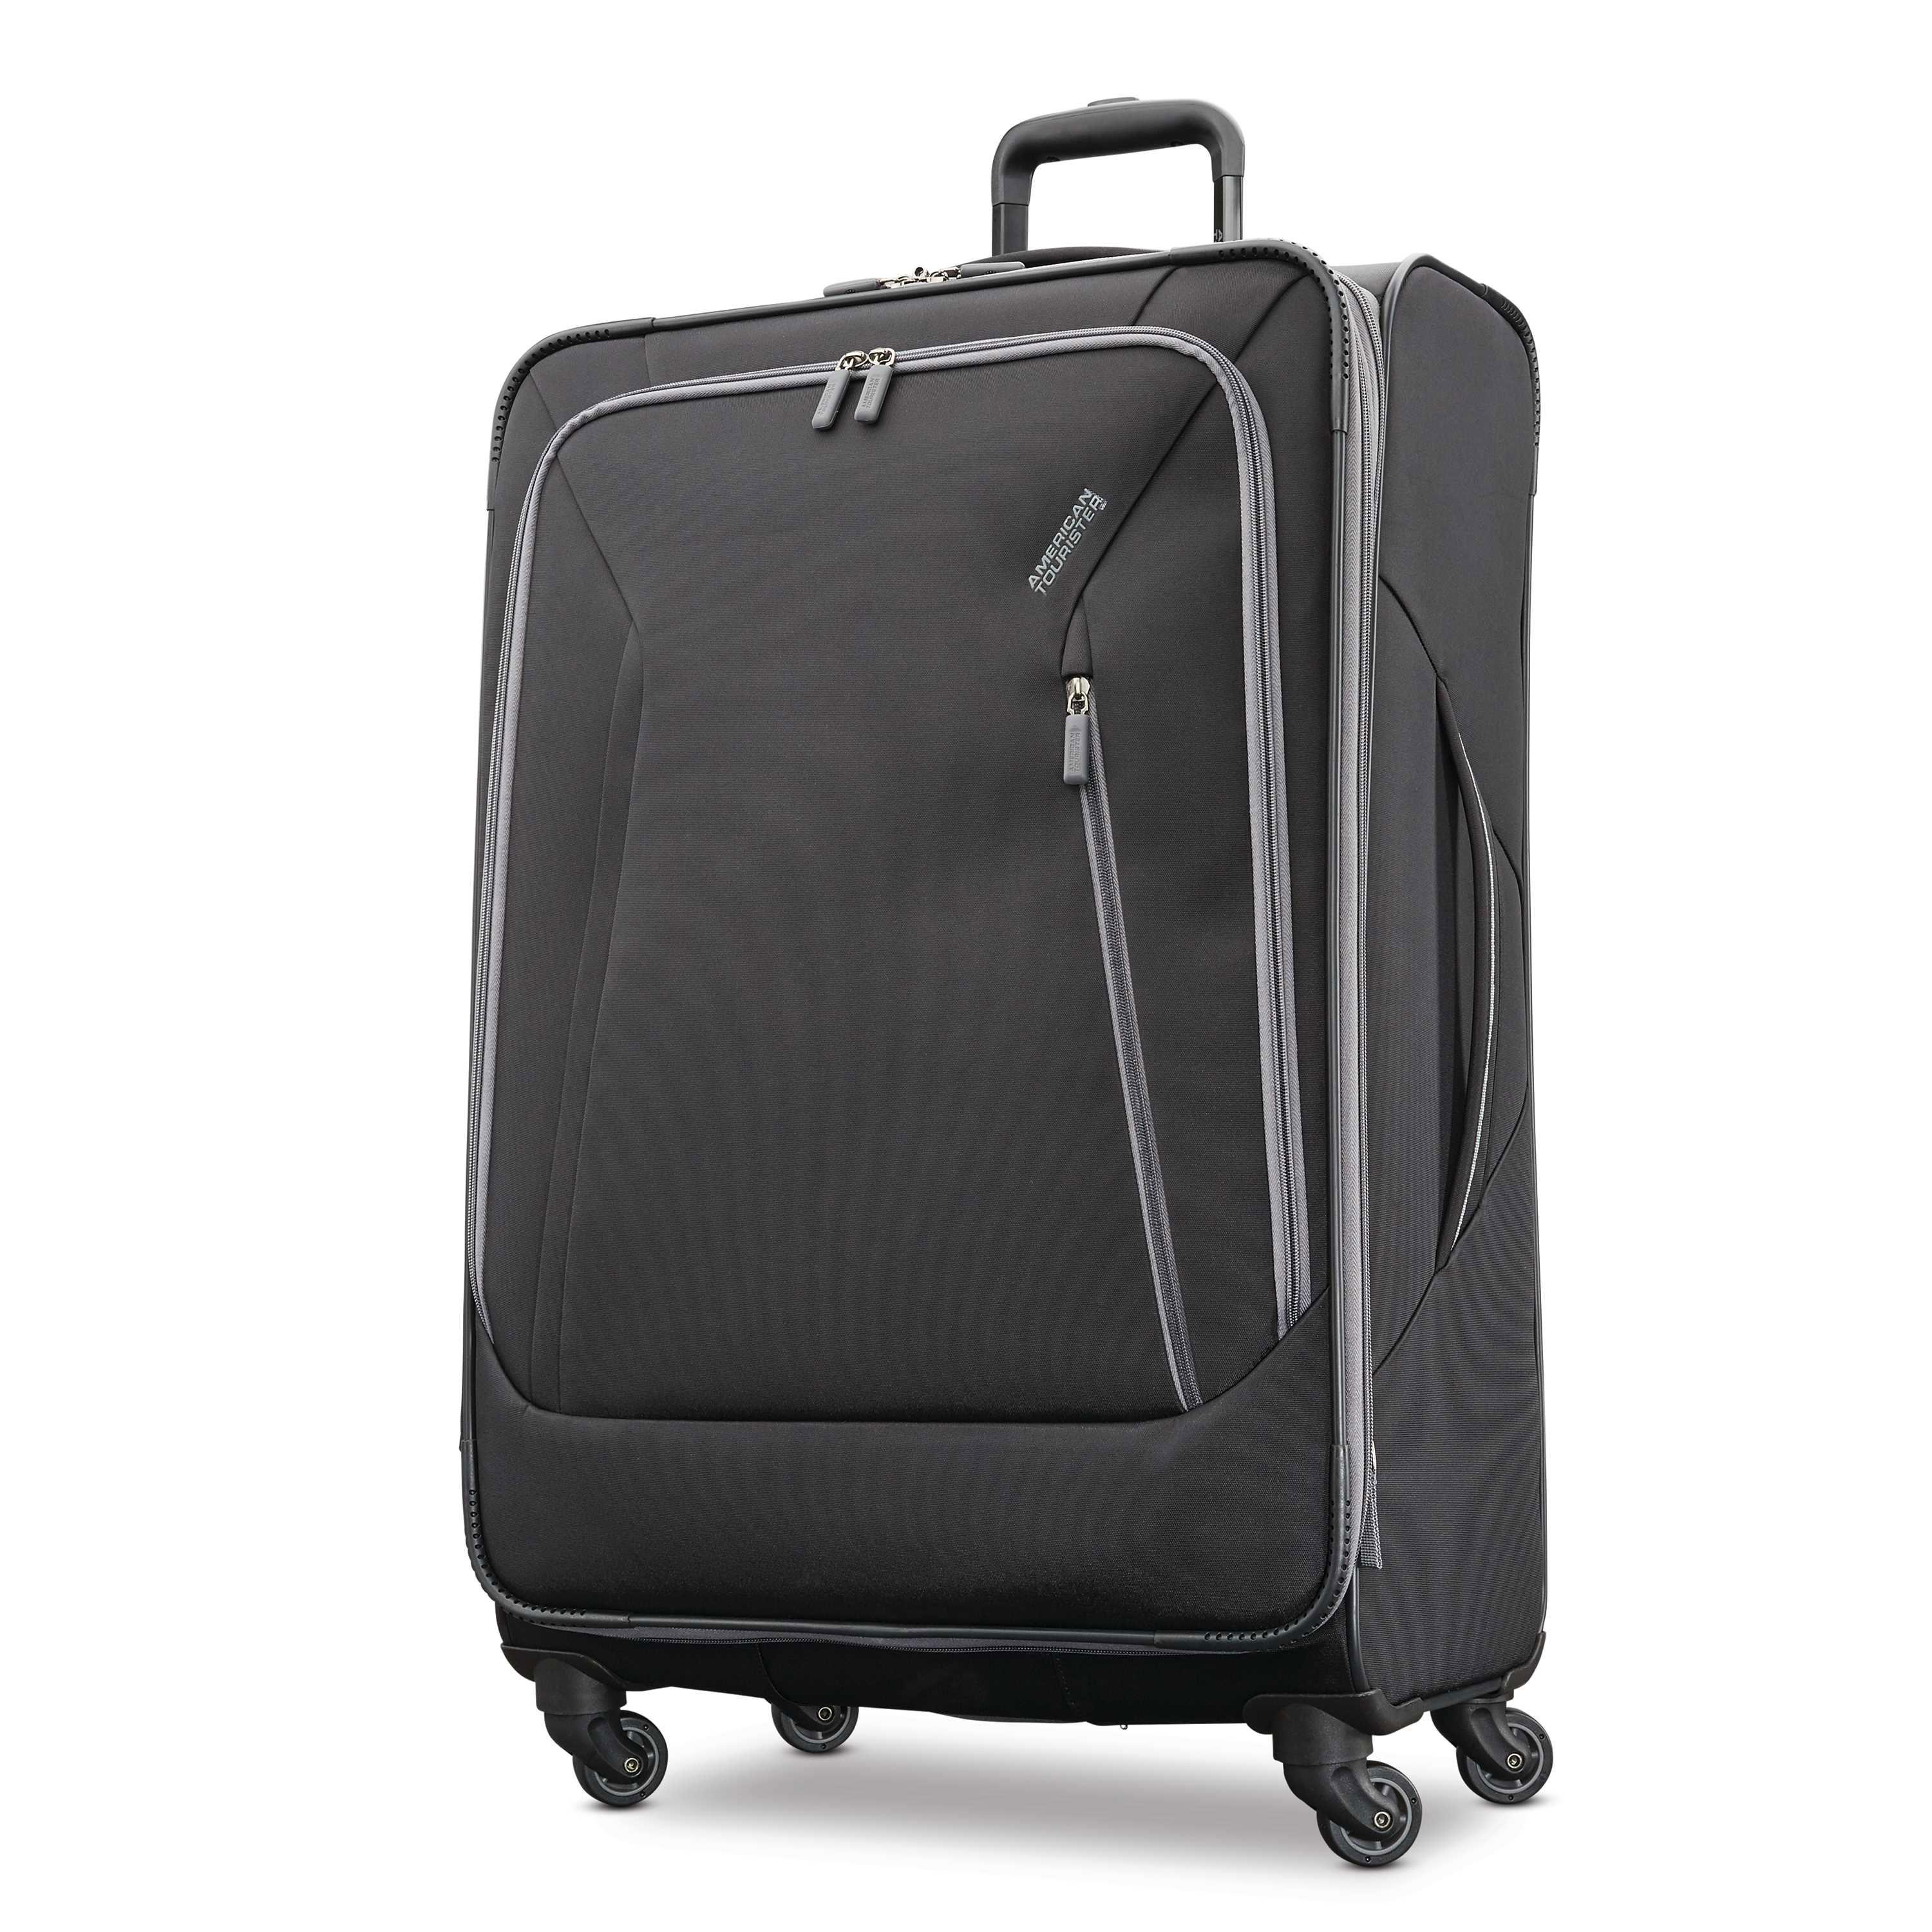 American Tourister Sonic Luggage—$39.99!